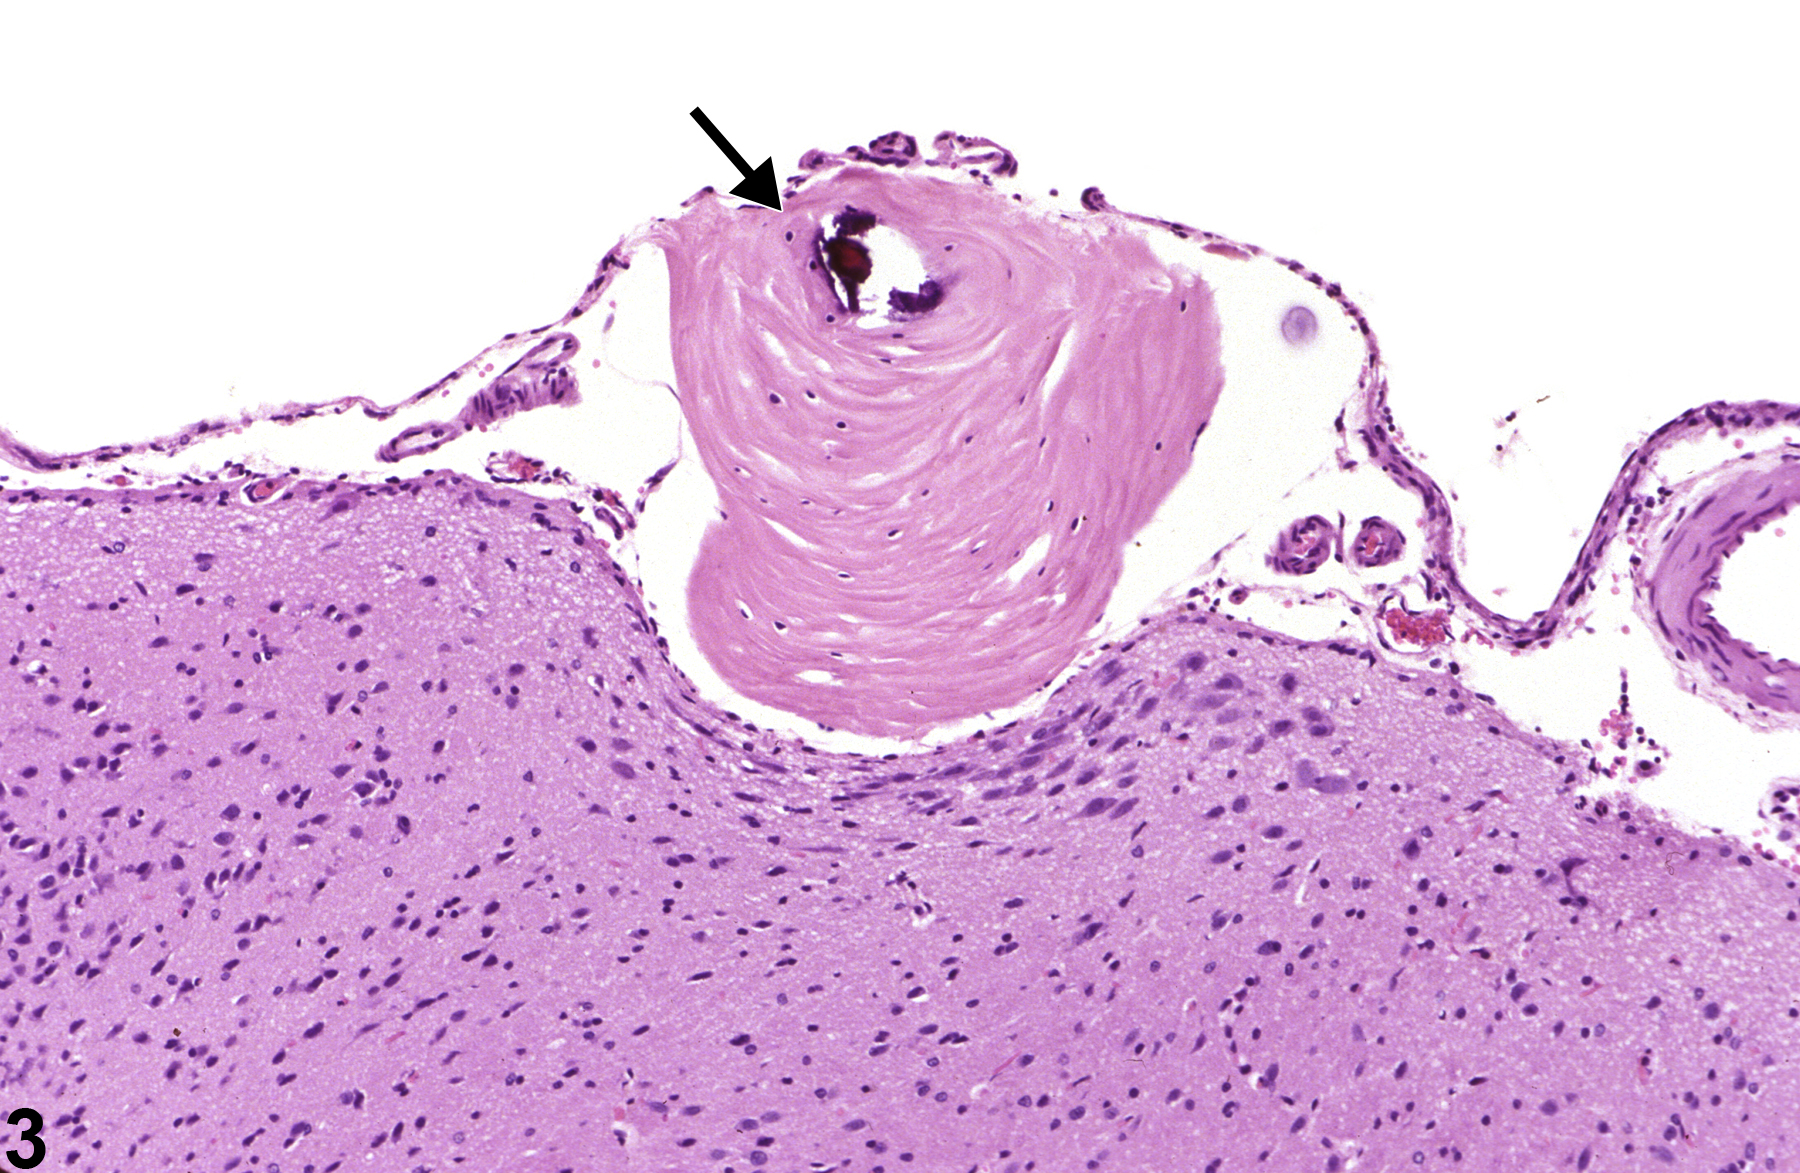 Image of epidermoid cyst in the brain from a male F344/N rat in a chronic study